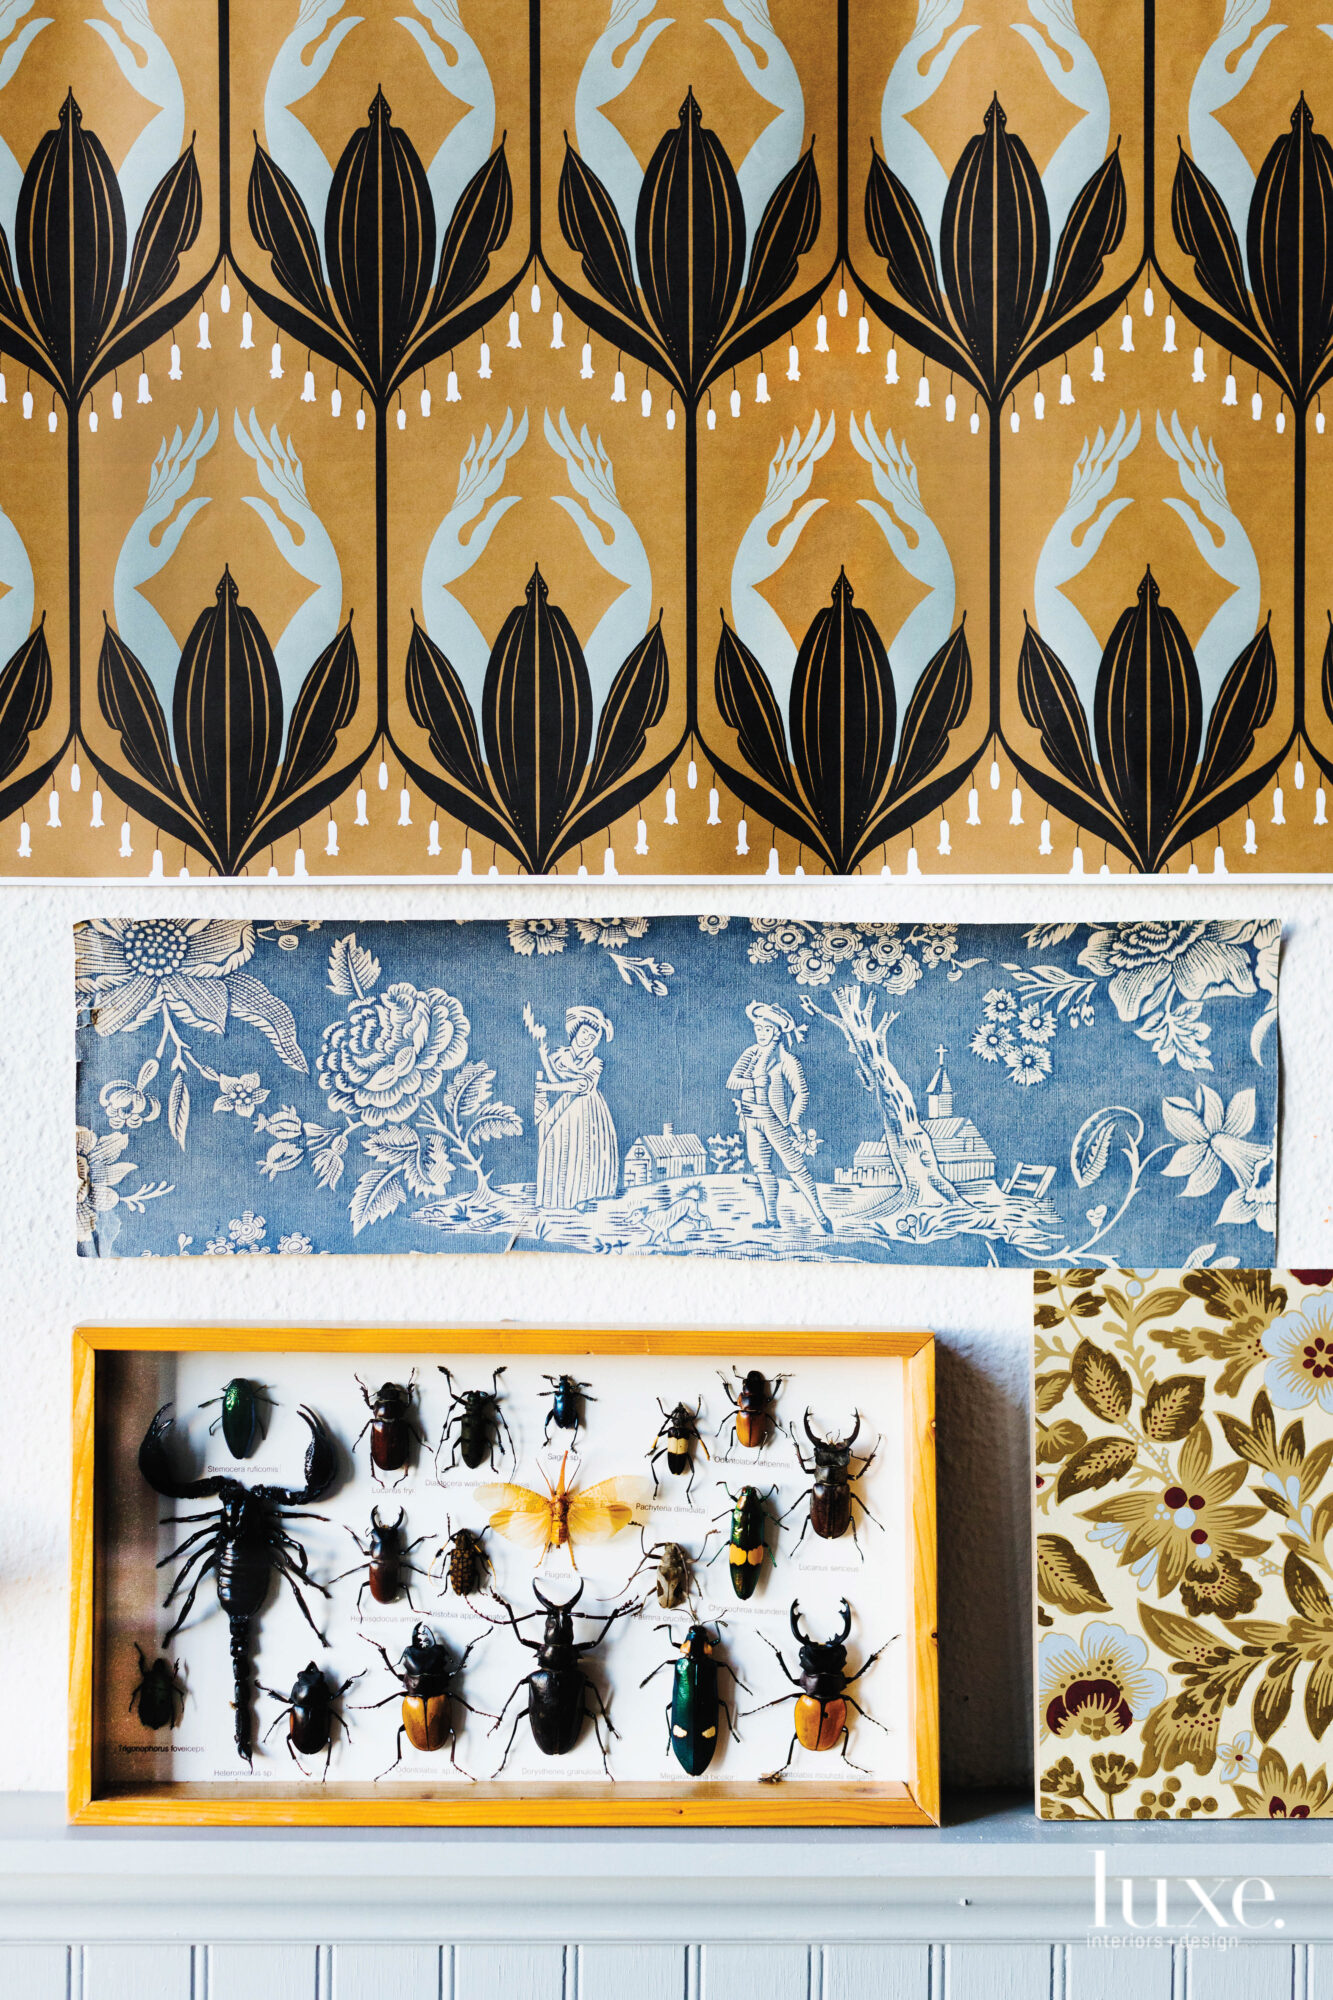 Mounted beetles, a toile pattern and a wallpaper design